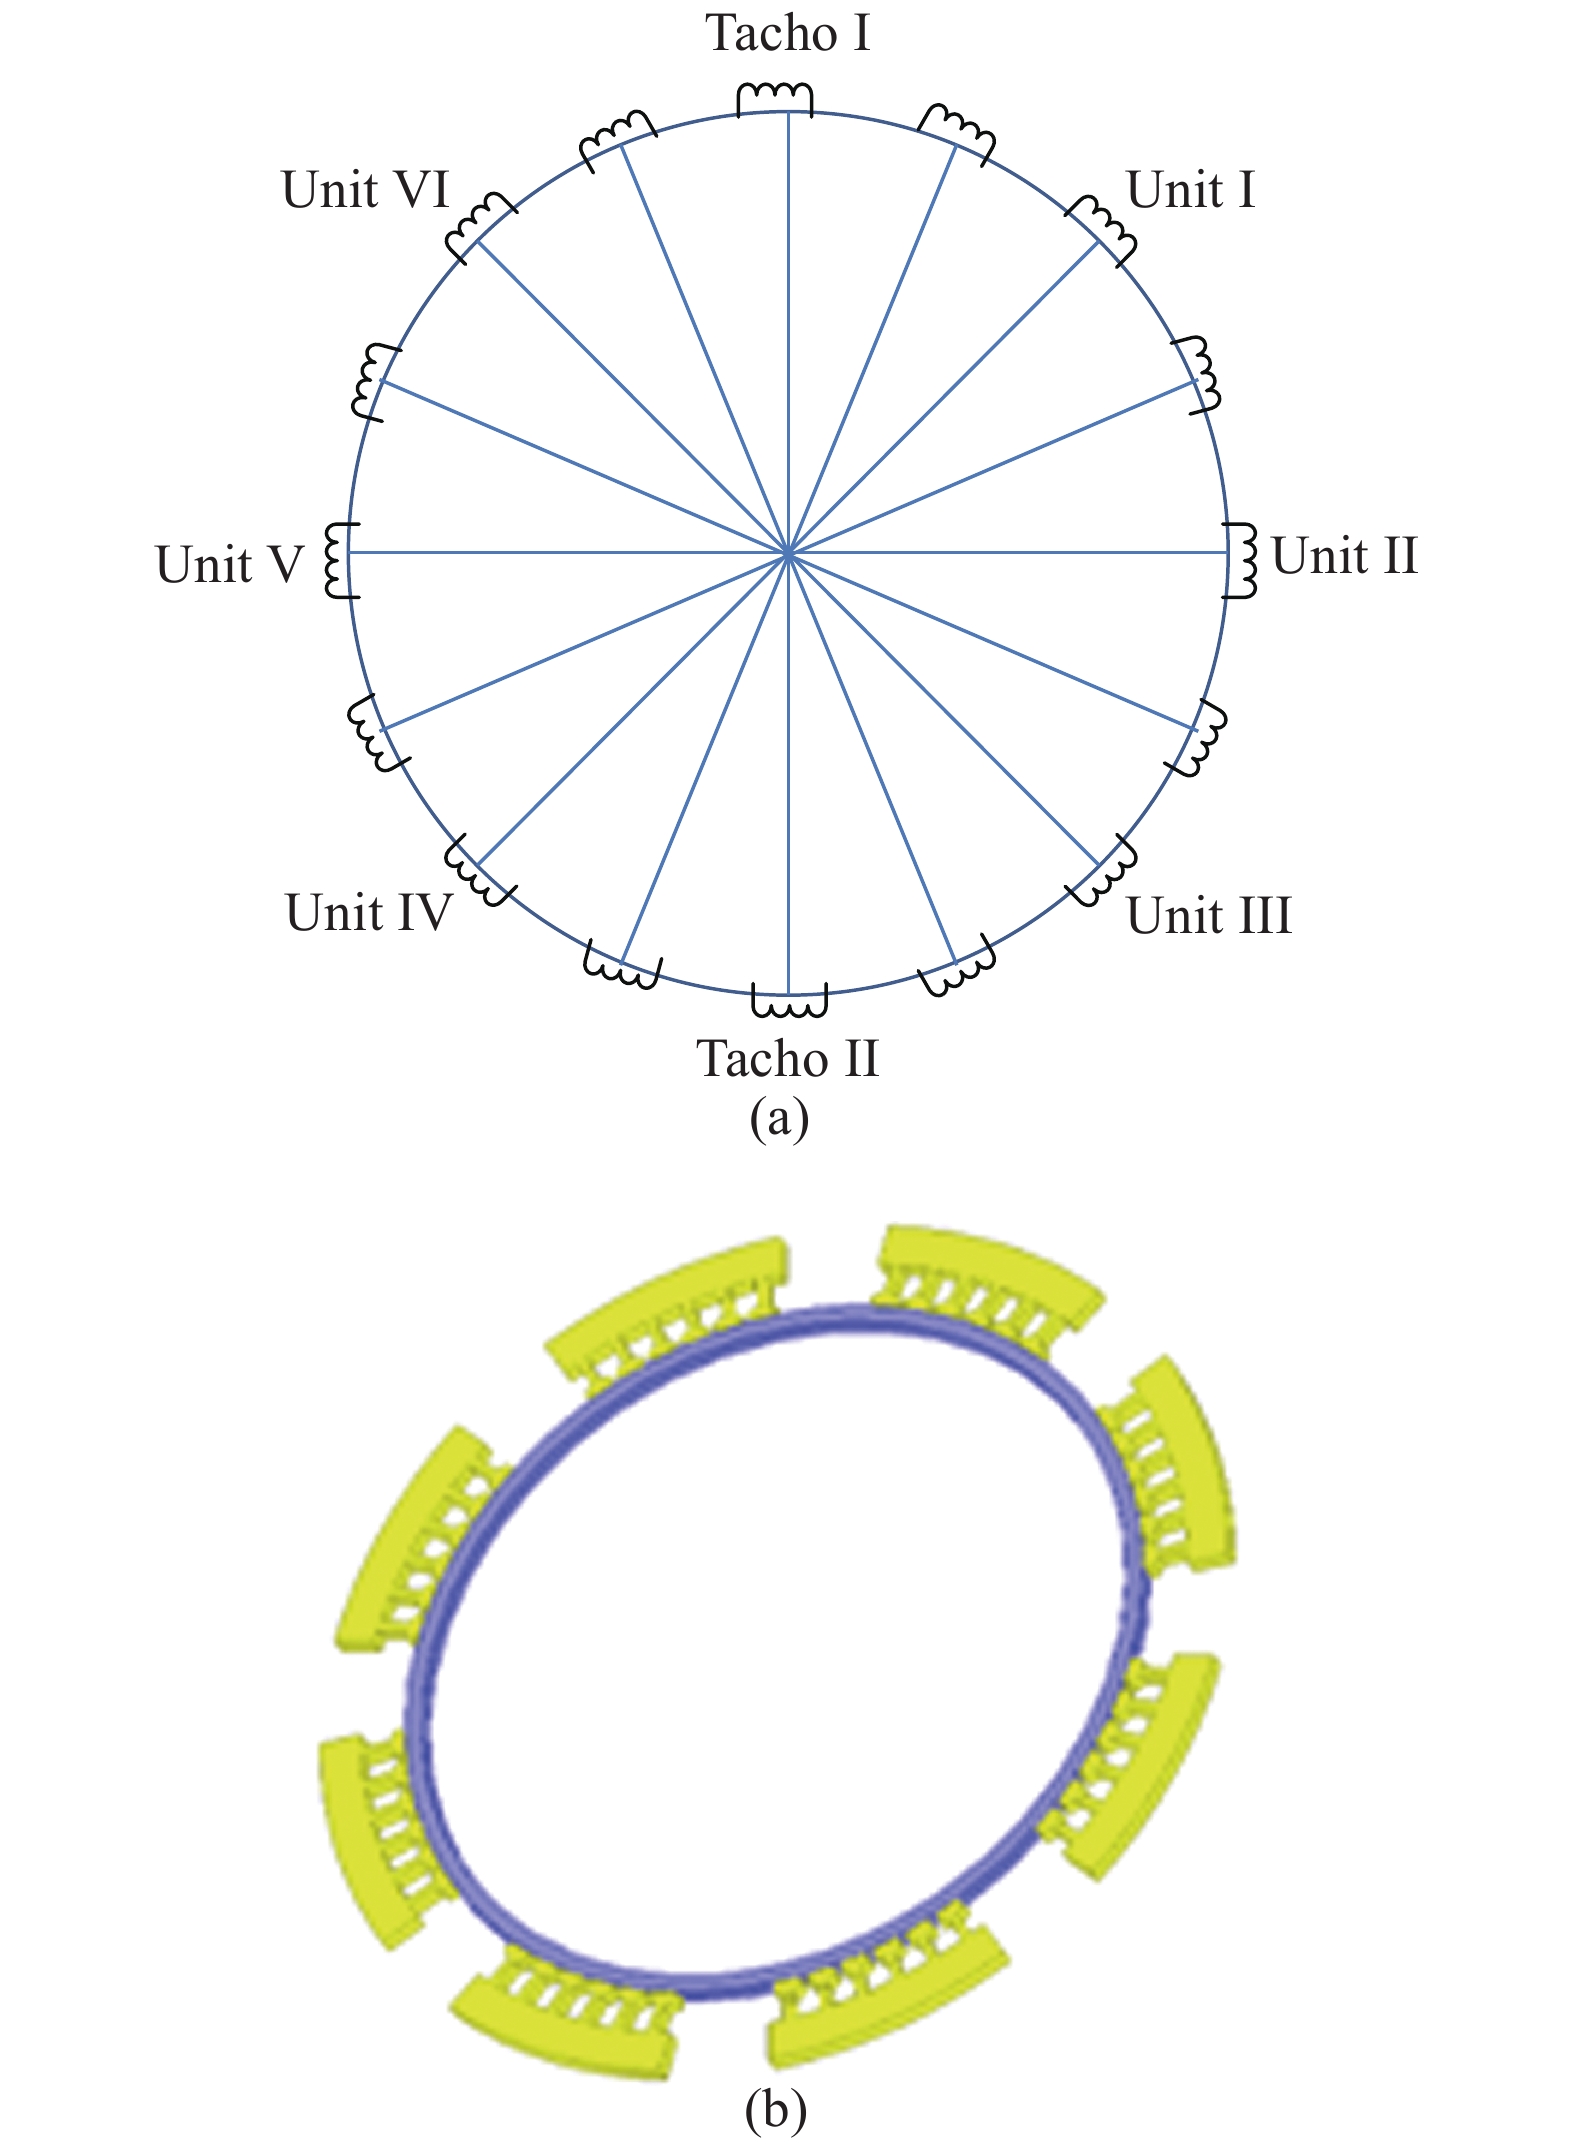 Structure distribution of segmented arc motor for large aperture telescope. (a) Stator winding; (b) Mechanical structure